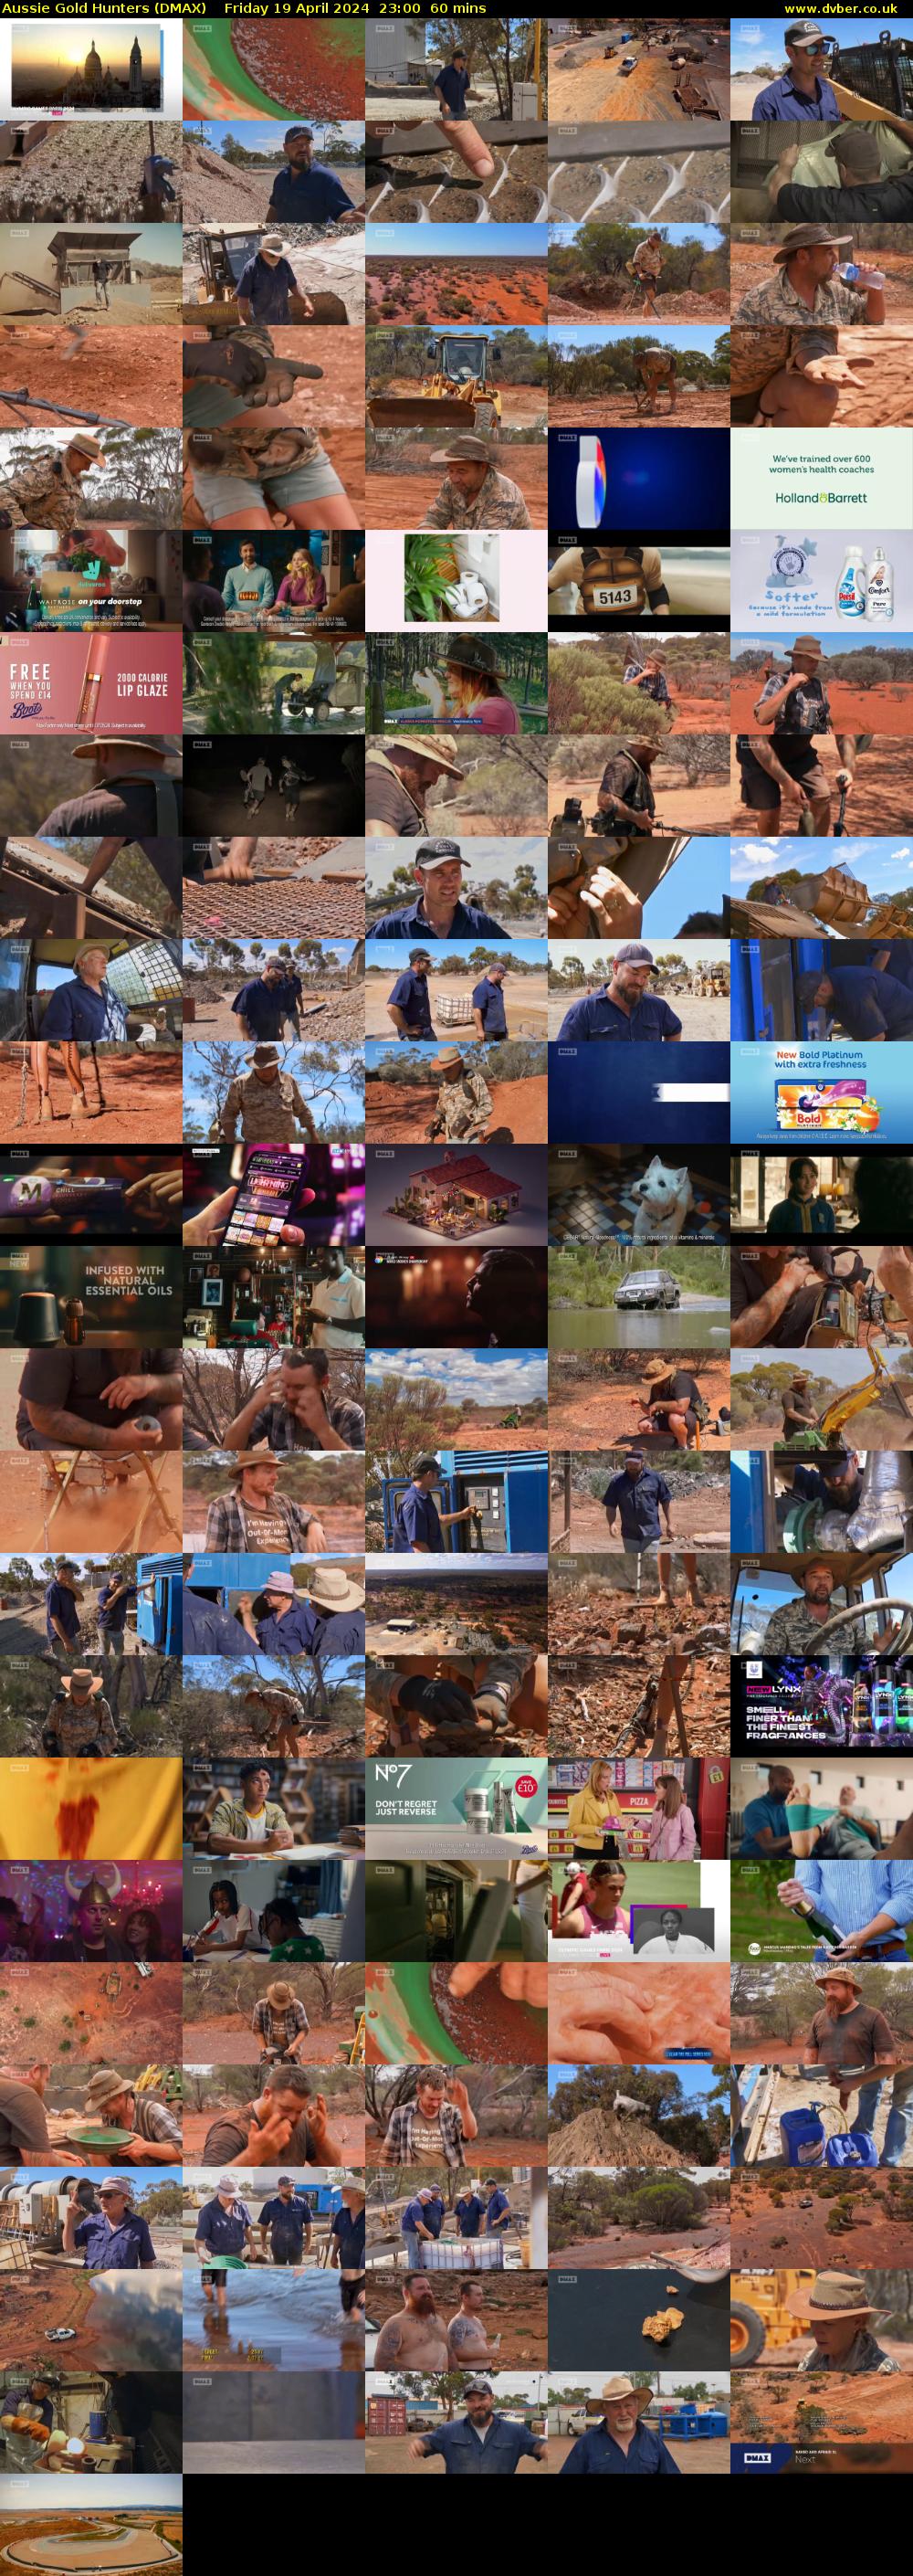 Aussie Gold Hunters (DMAX) Friday 19 April 2024 23:00 - 00:00